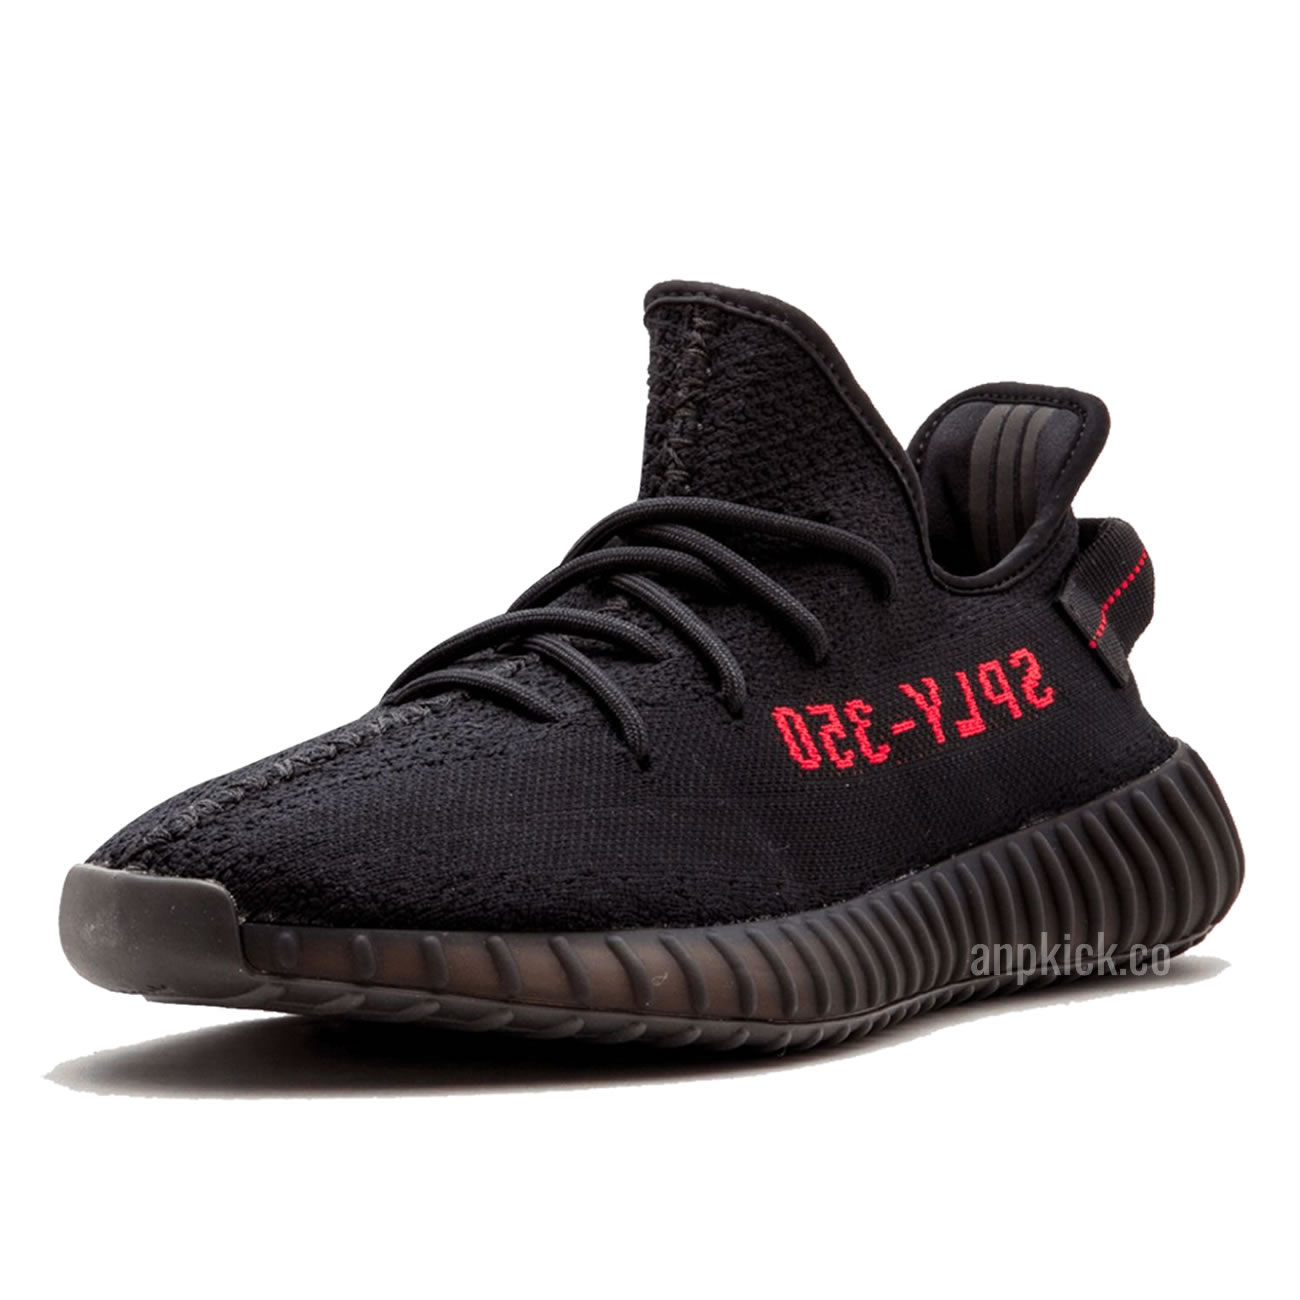 Yeezy Boost 350 V2 Bred Black Red 2020 New Release Cp9652 (4) - newkick.org